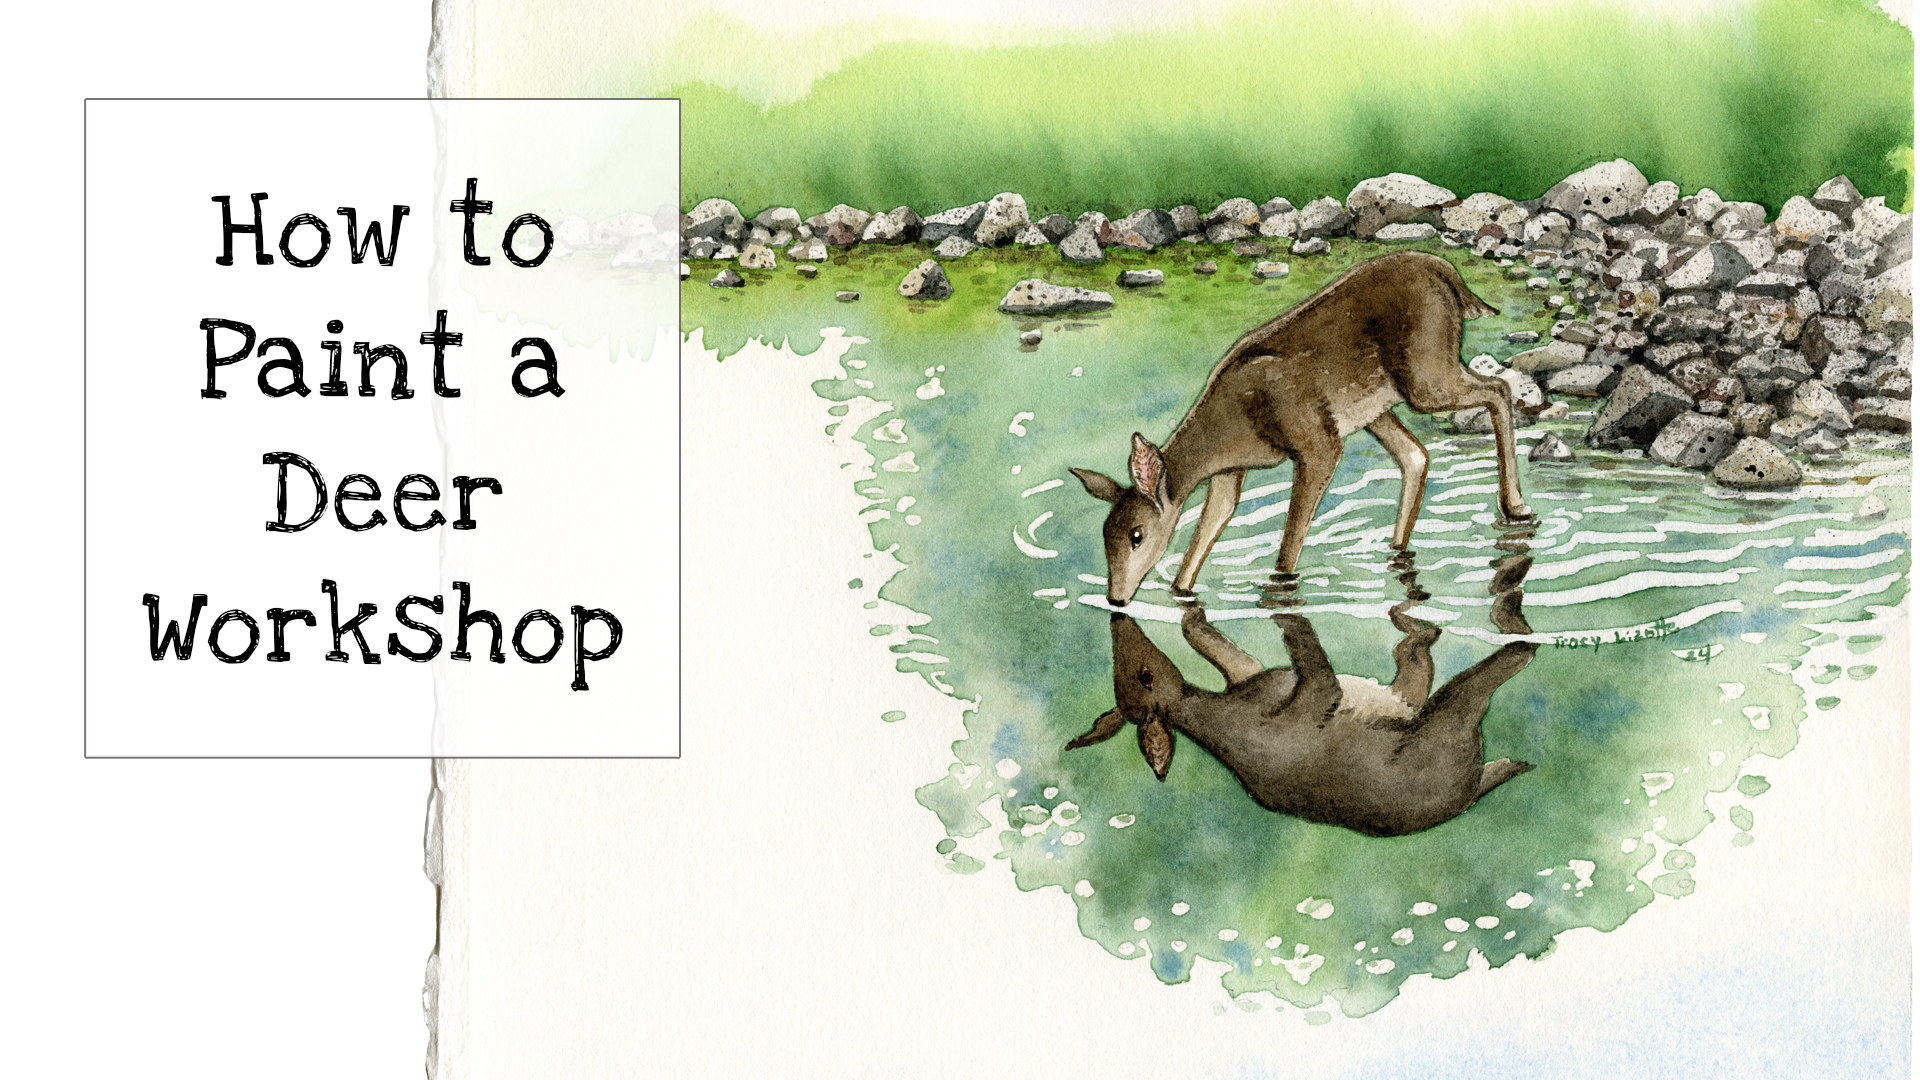 How to Paint a Deer with Watercolors